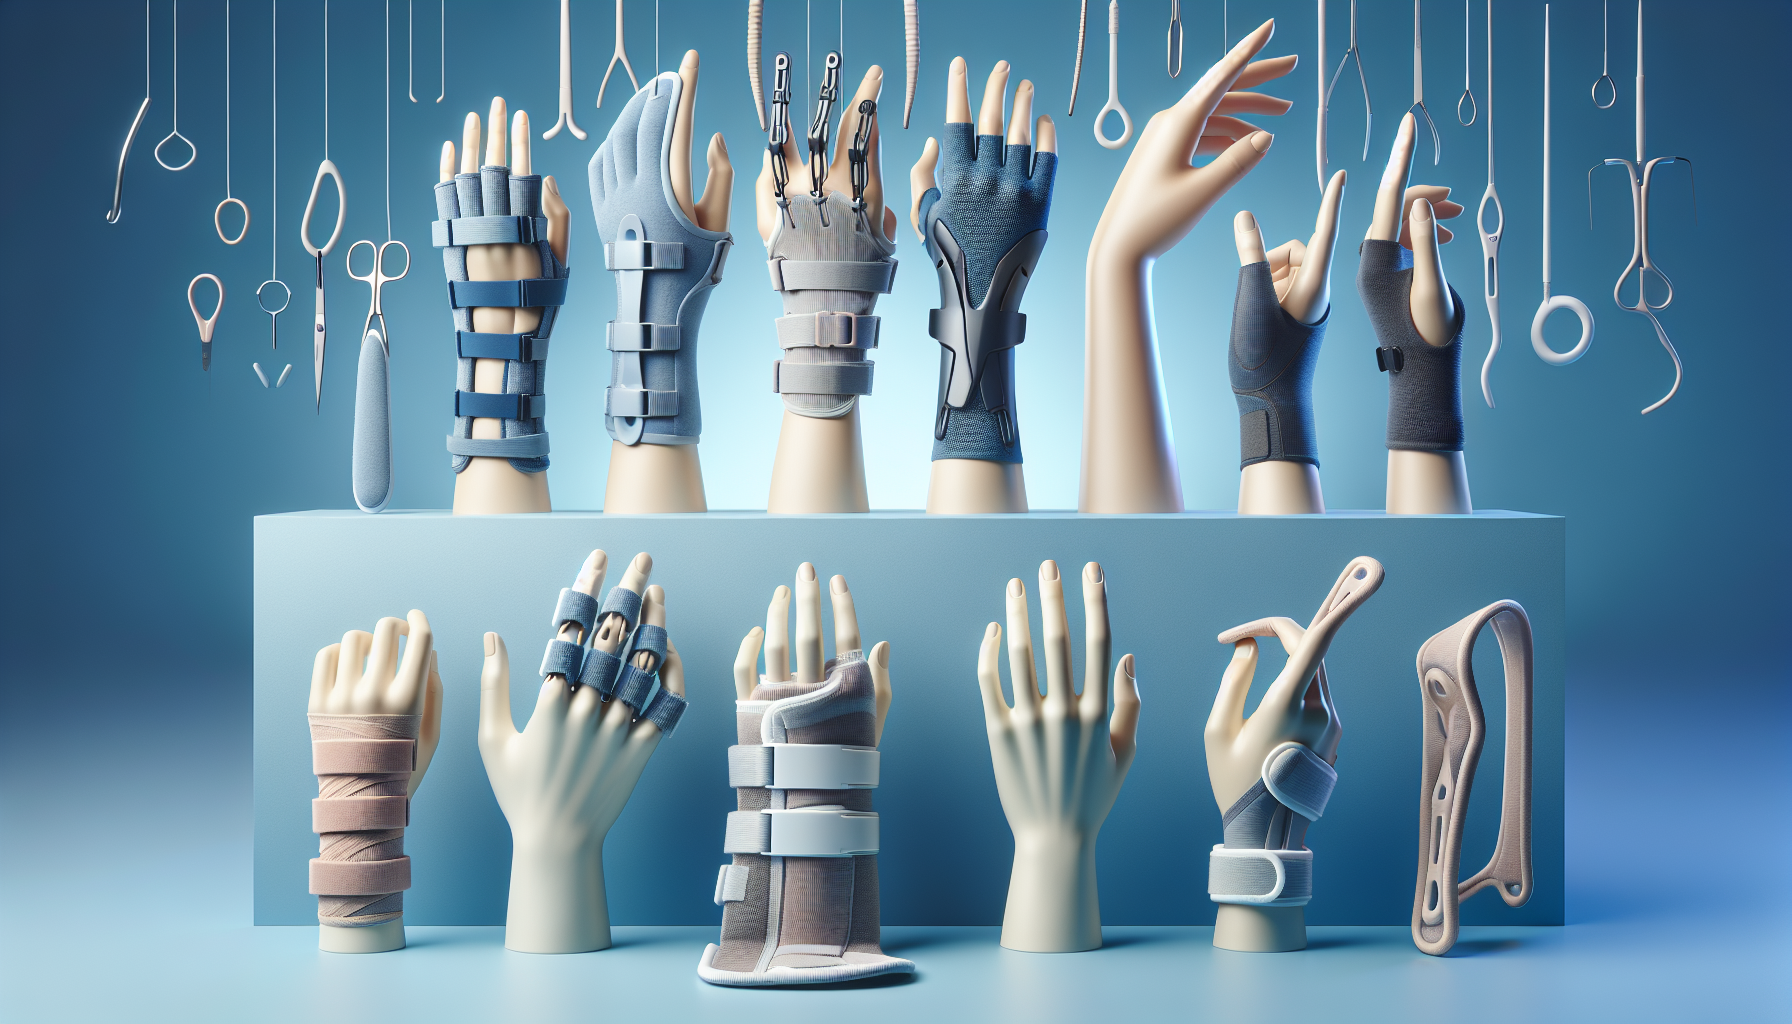 Illustration of assistive devices for arthritic fingers